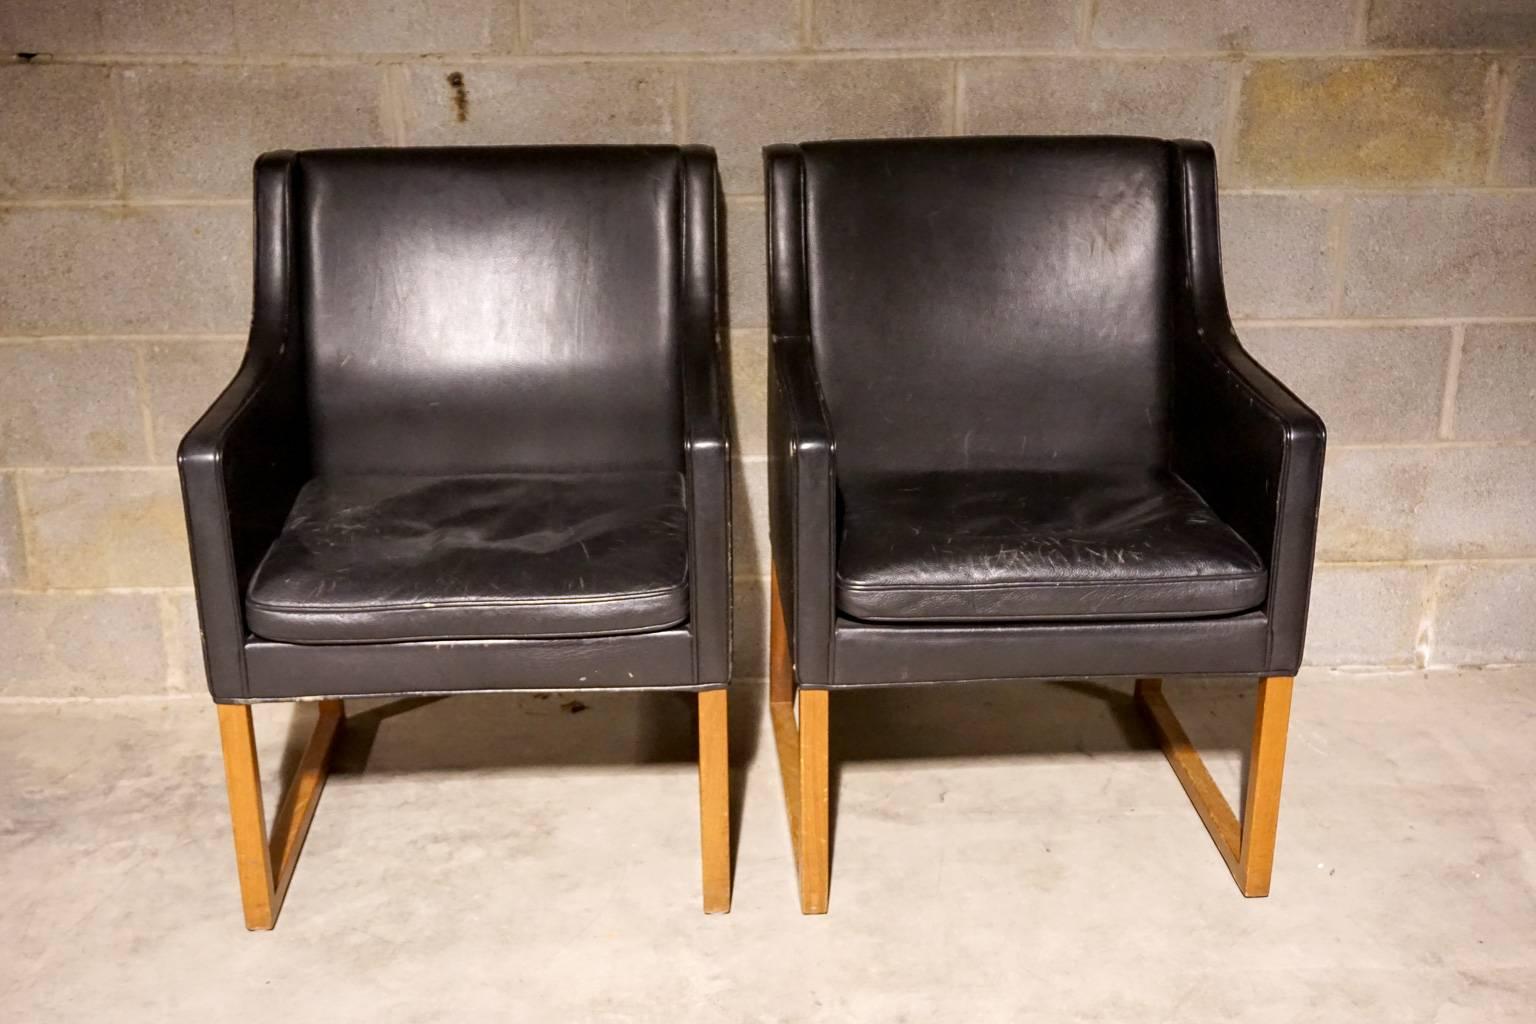 Pair of leather chairs designed by Borge Mogensen, model 3246. Black leather with oak legs. Age related wear and use.